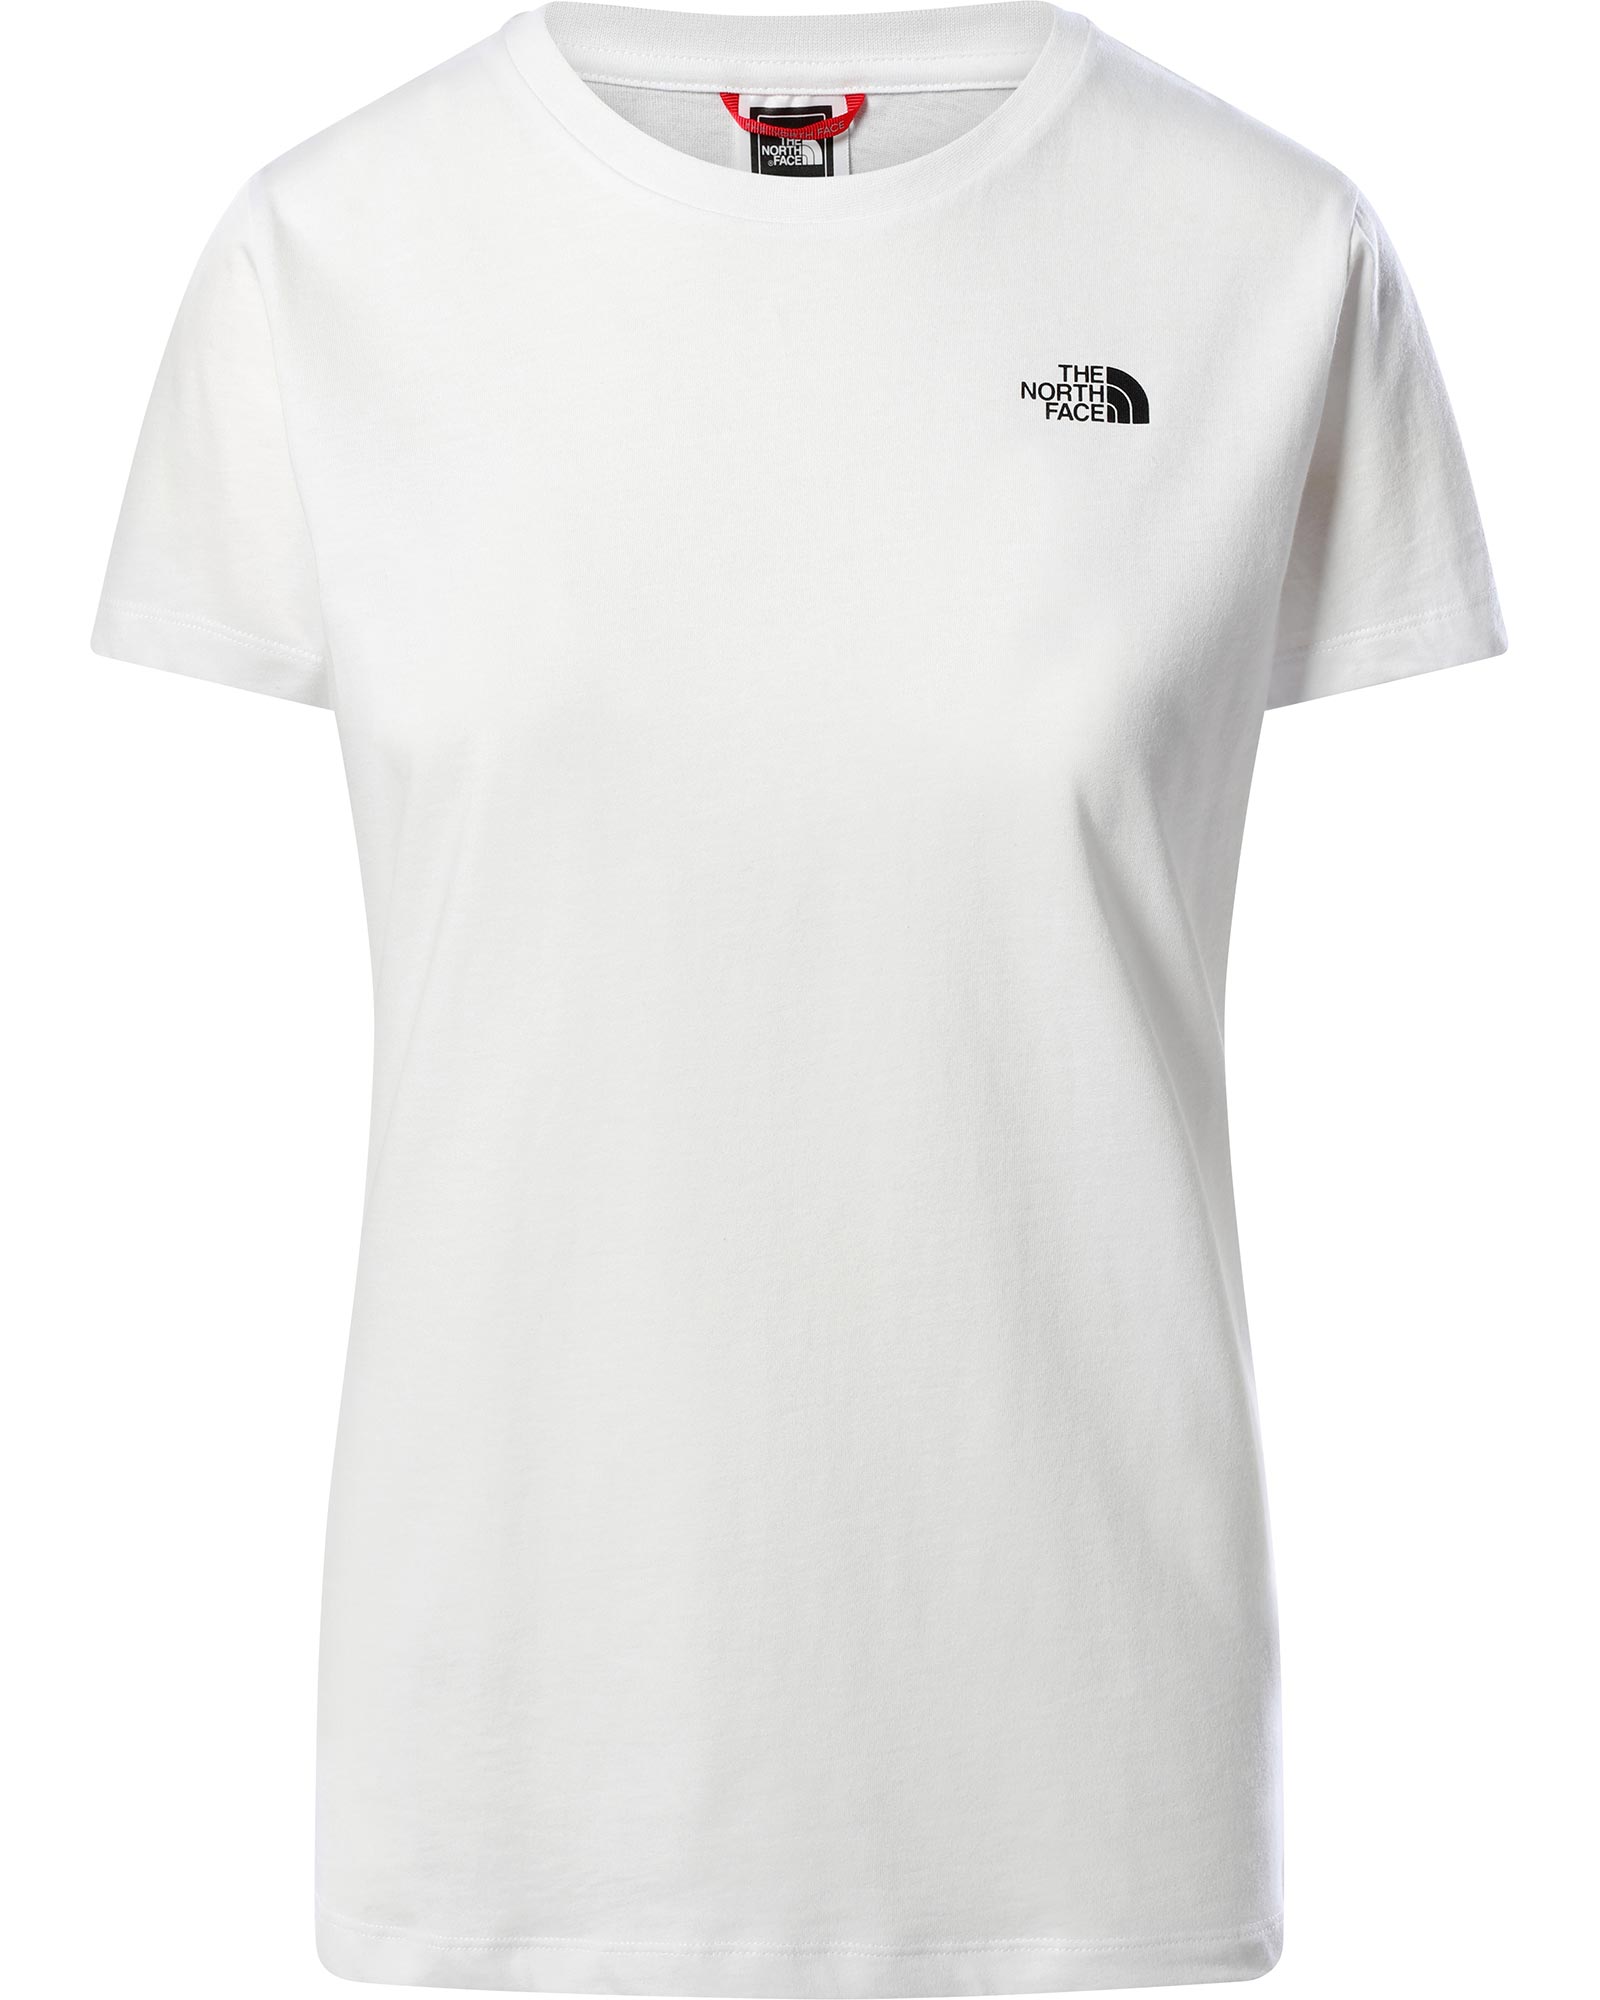 The North Face Simple Dome Women’s T Shirt - TNF White L